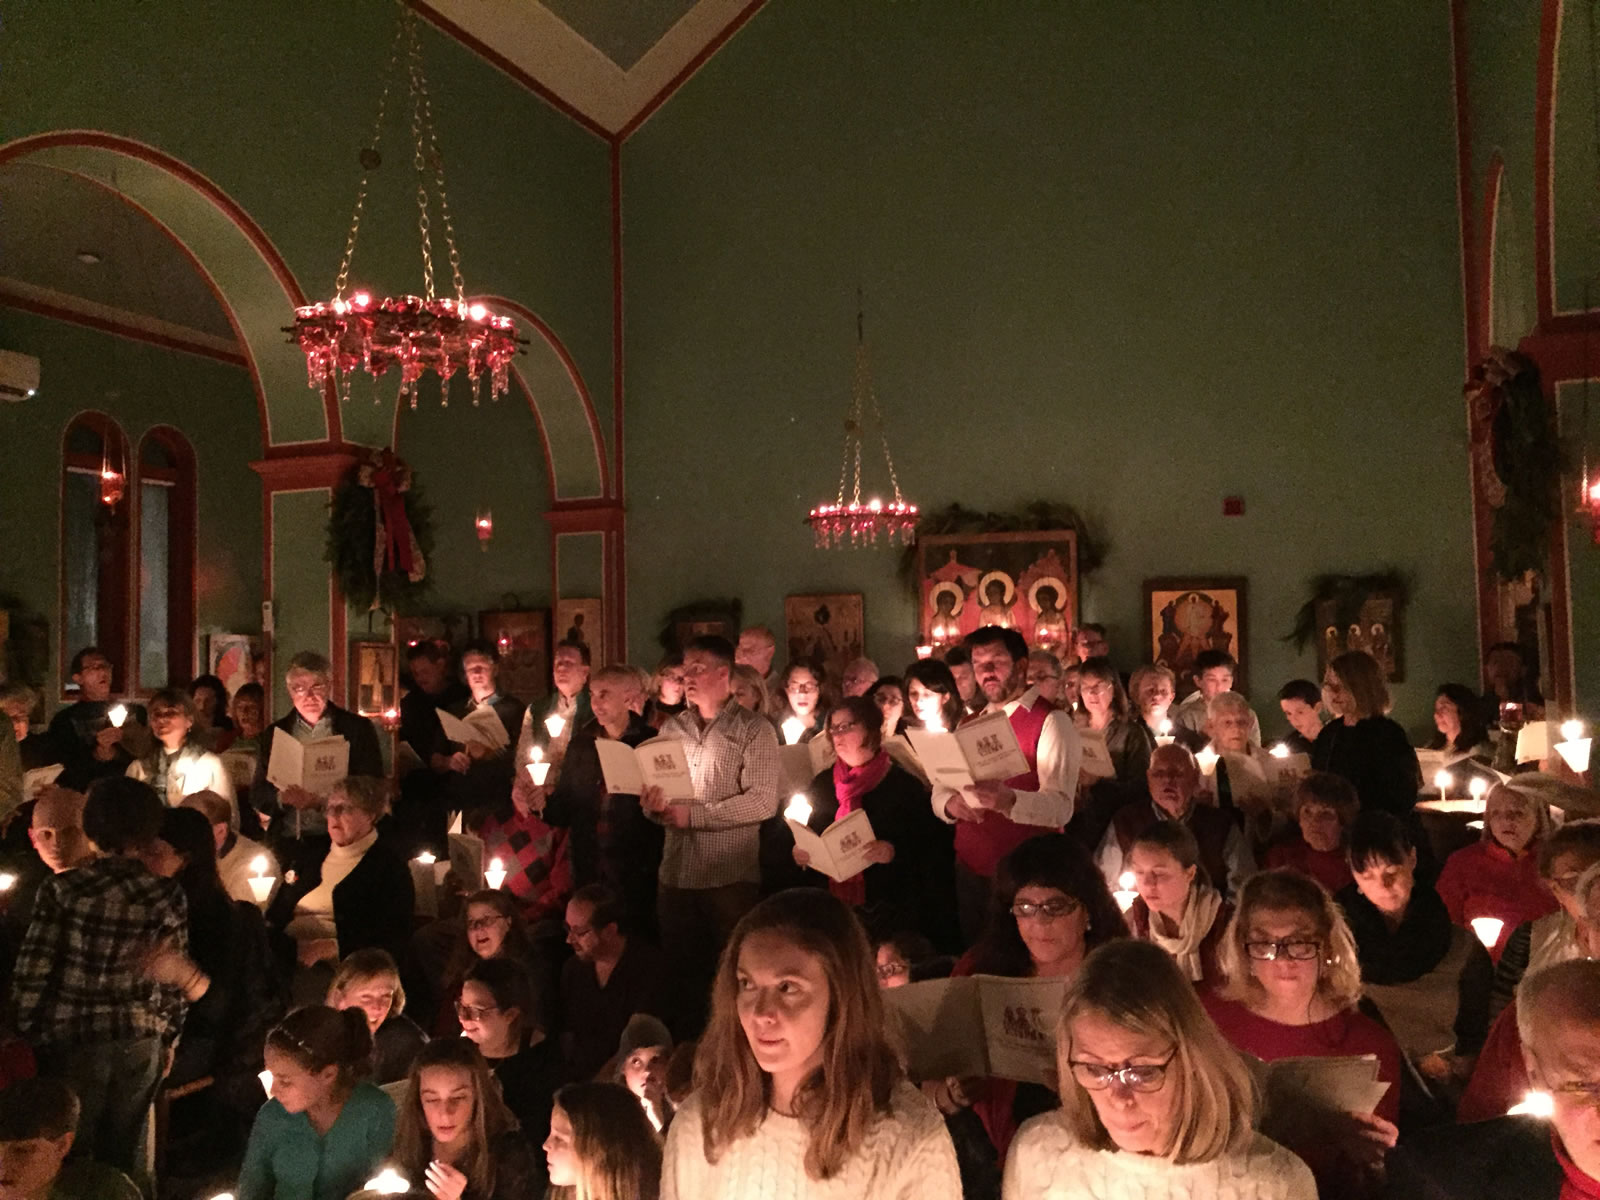 St John the Russian Parish in Ipswich, MA, Hosts a Missionary Event Drawing 300 People (Photo-Report)